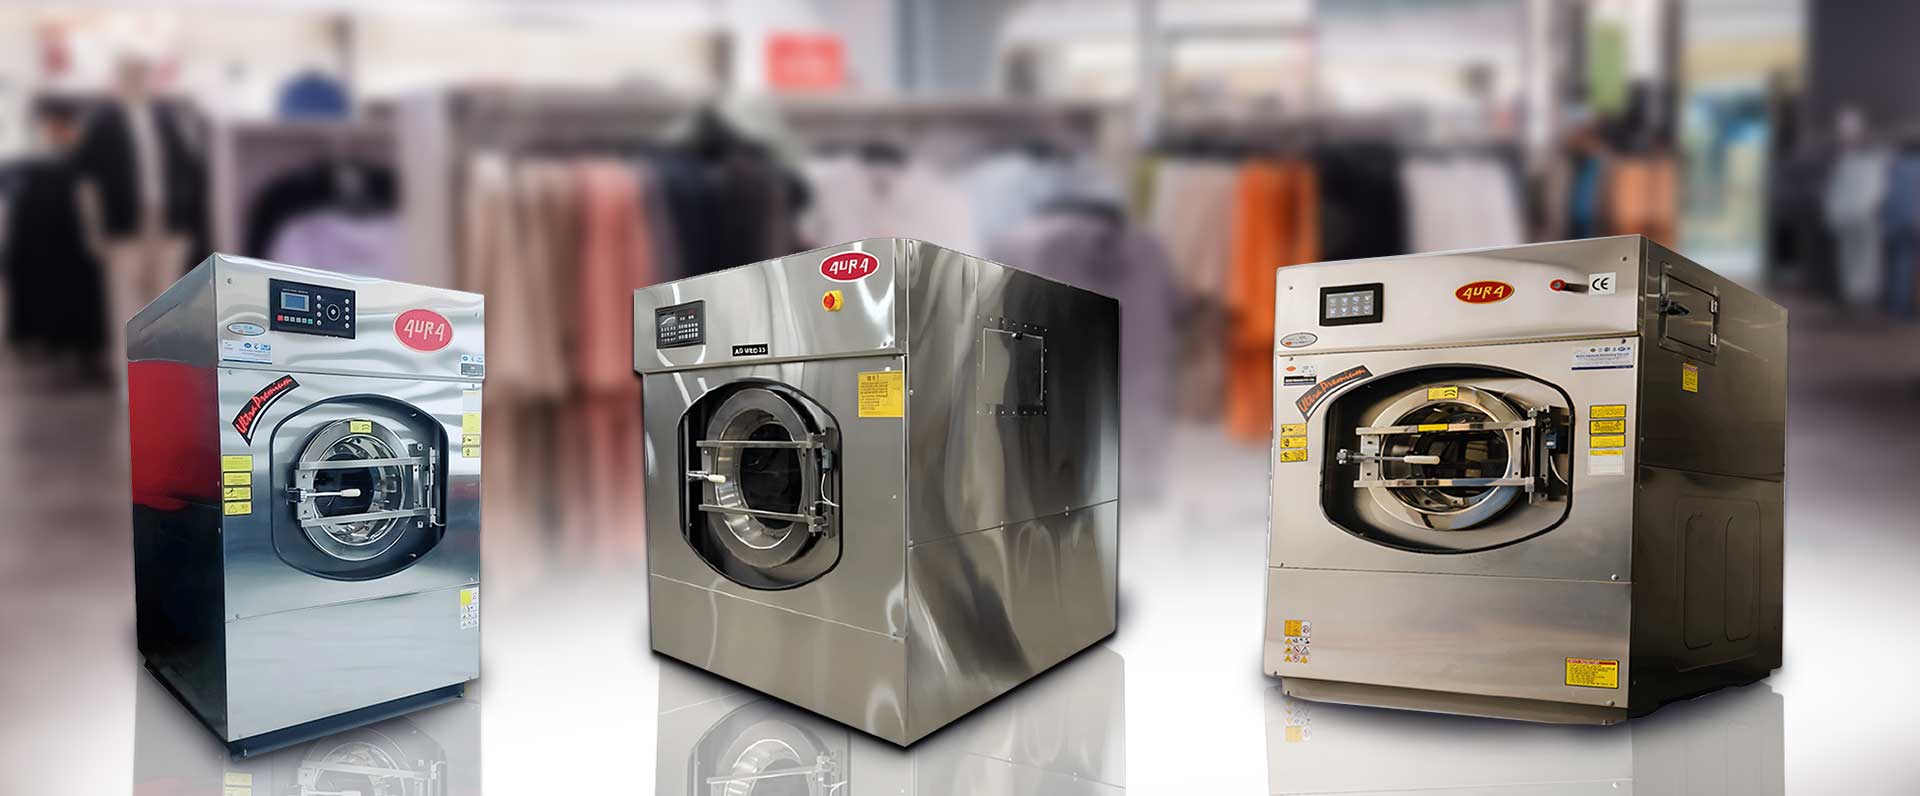 All In One Machines, All in One Fully Automatic Industrial Laundry Machine